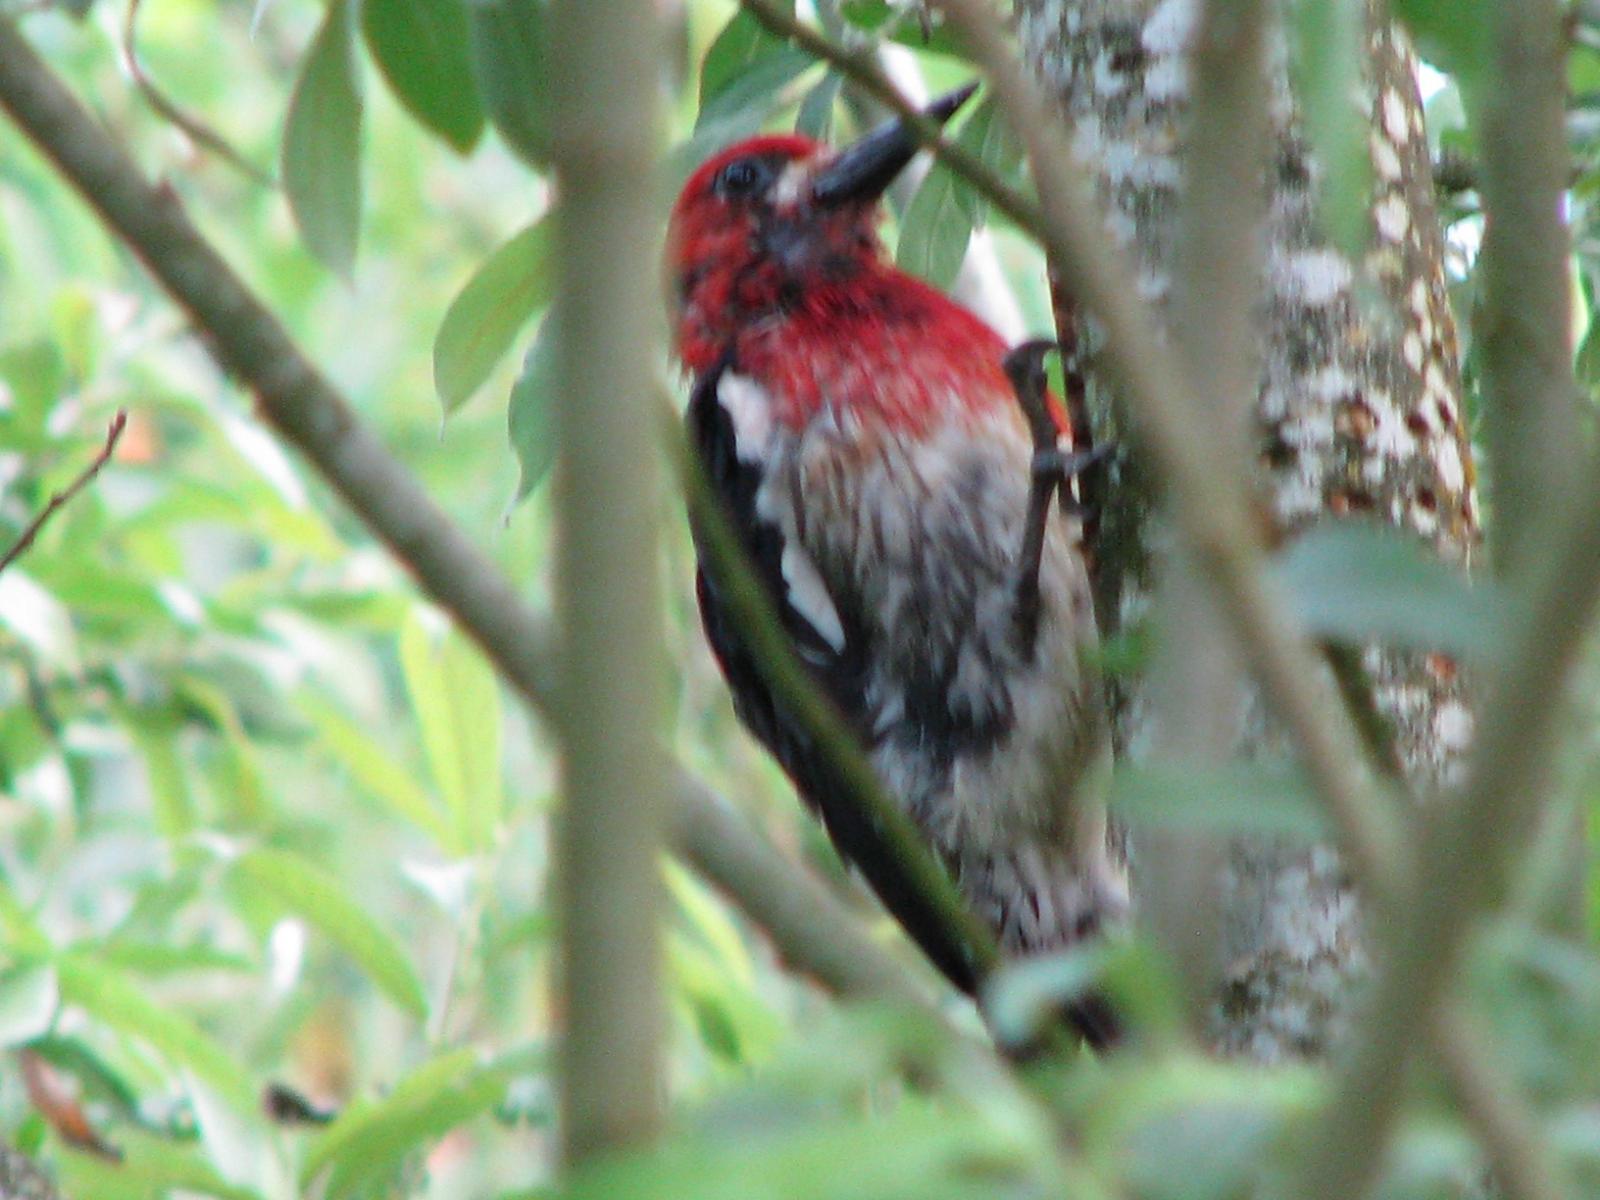 Red-breasted Sapsucker Photo by Ted Goshulak